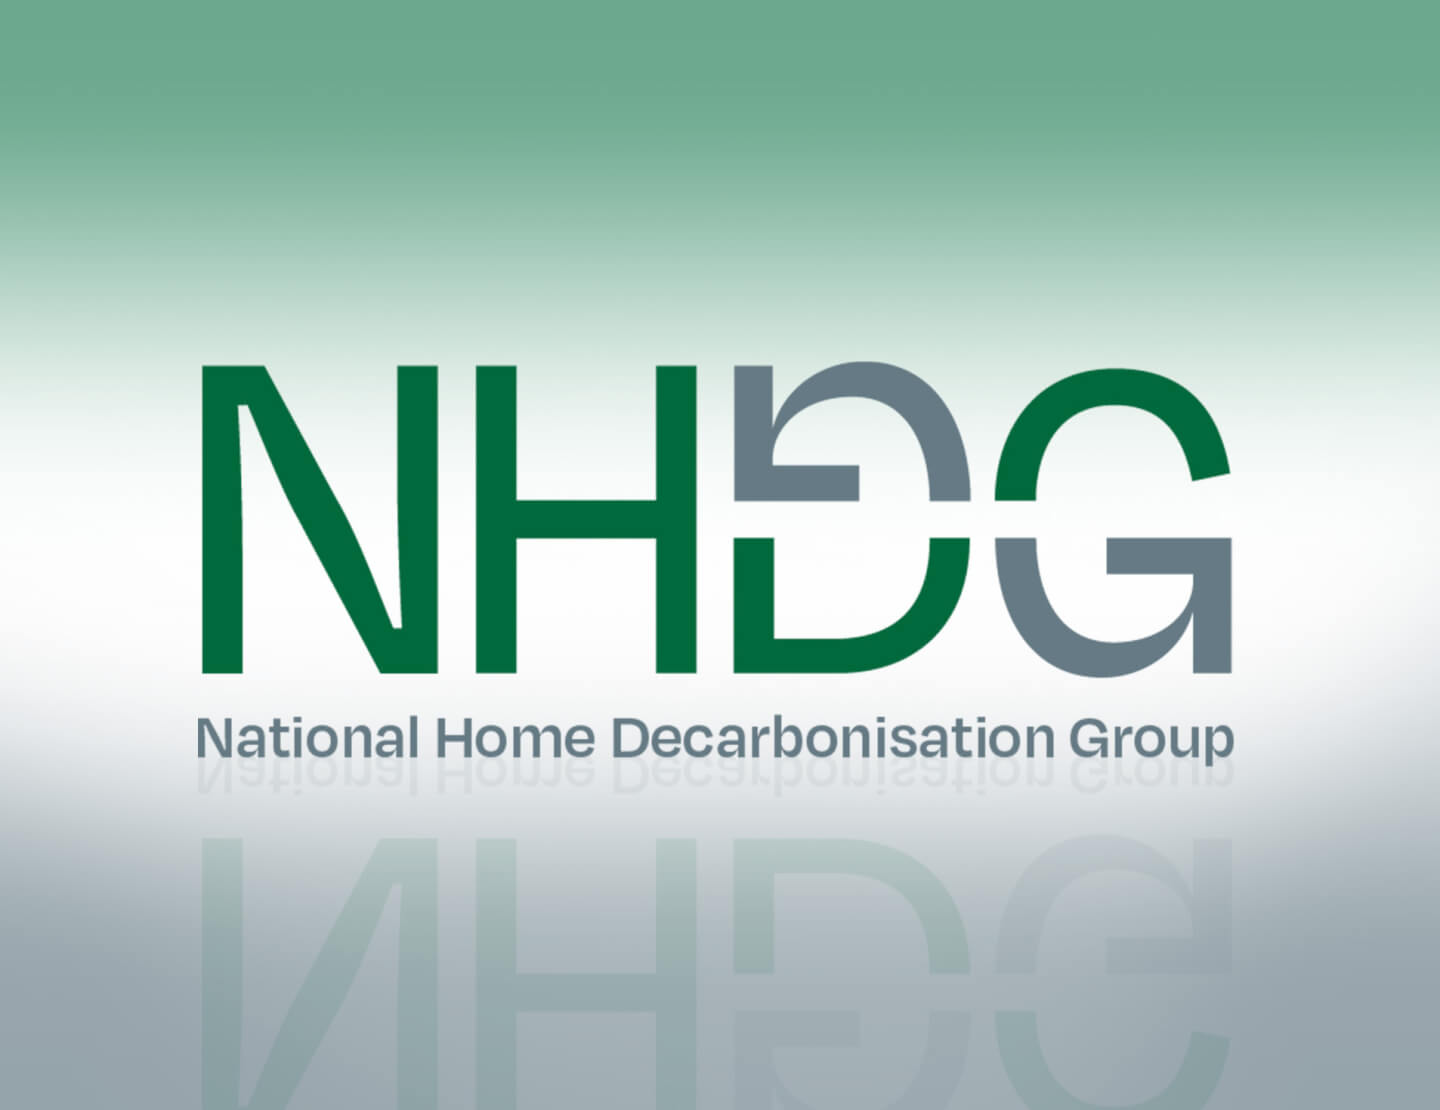 National Home Decarbonisation Group